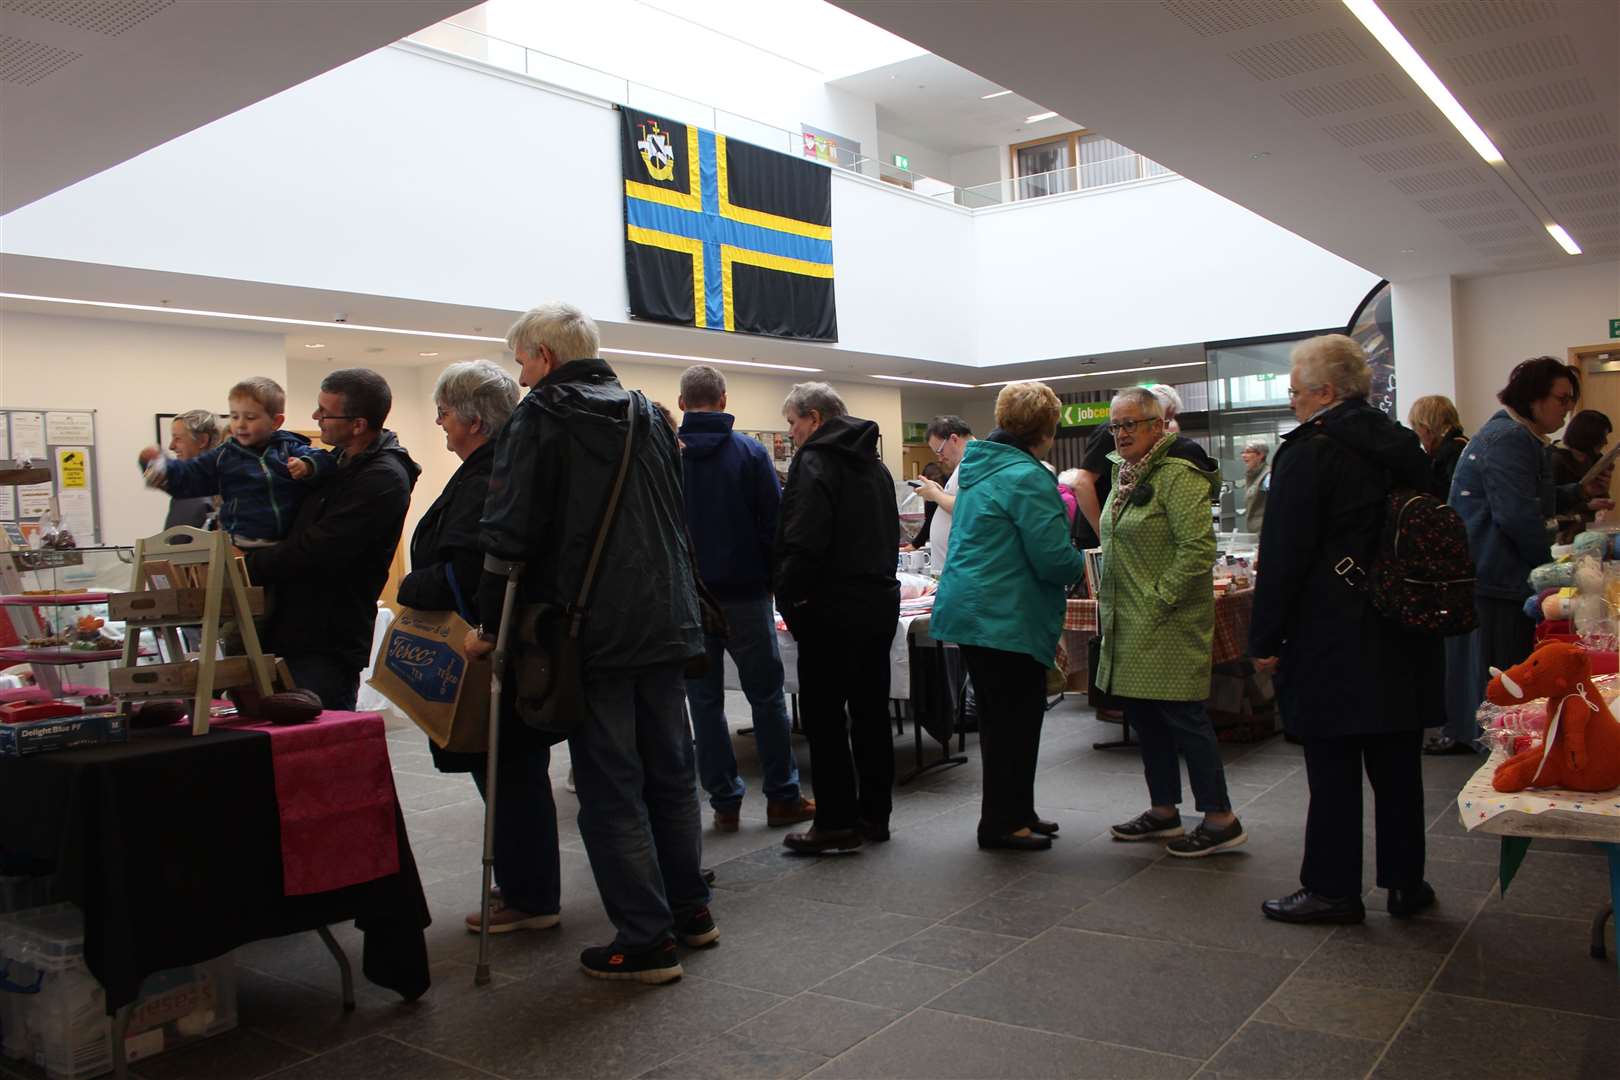 There was another good turnout for the second trial market last Saturday in the foyer of Caithness House.